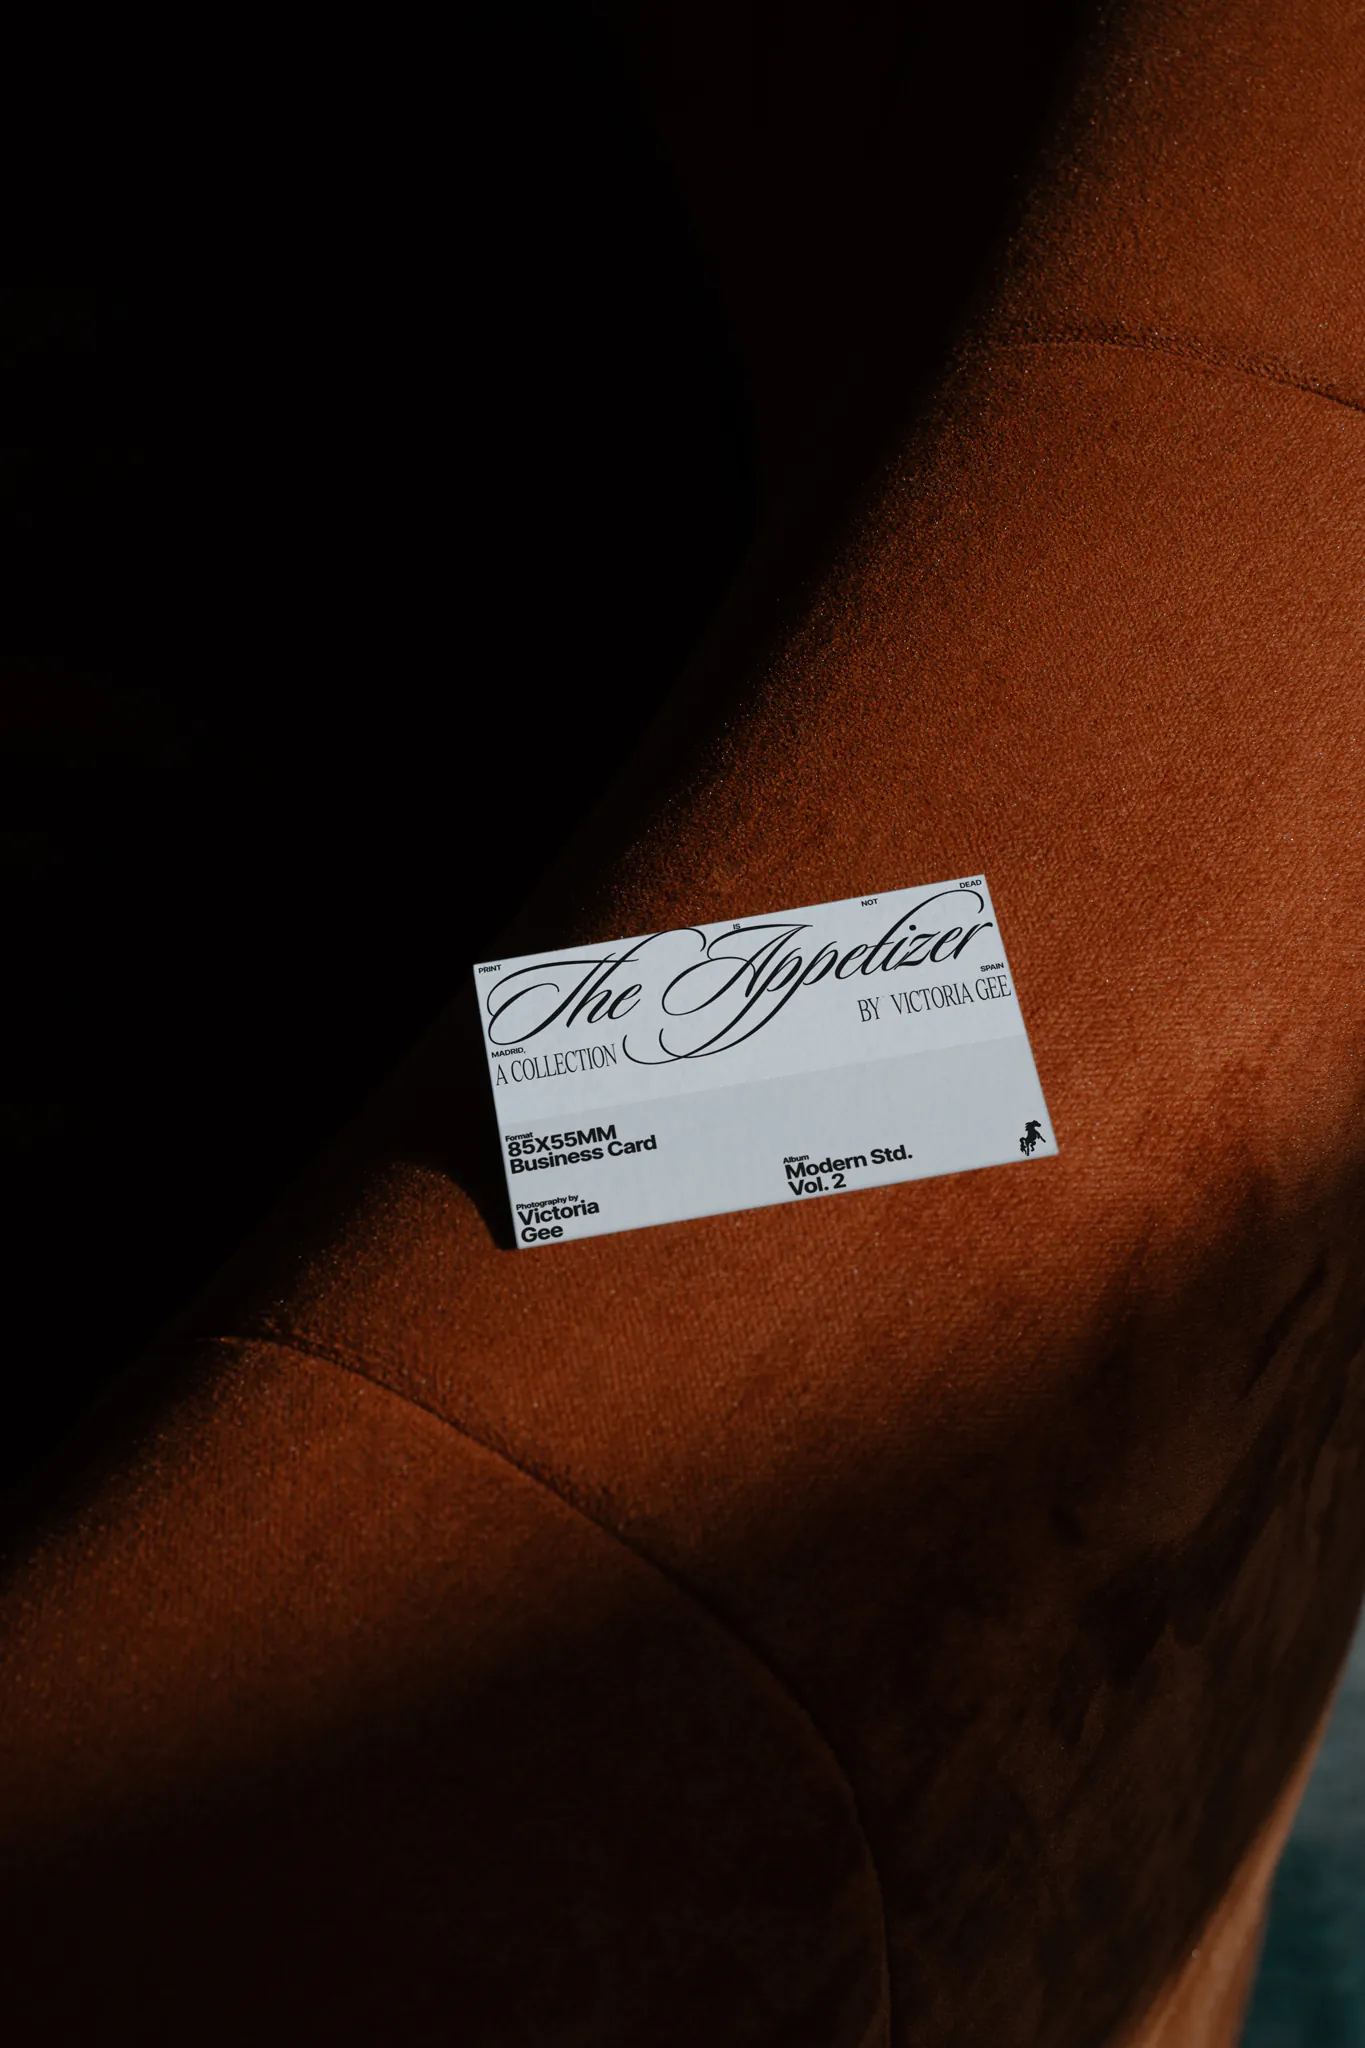 Business card mockup on top of a fancy orange couch. Branding mockup.